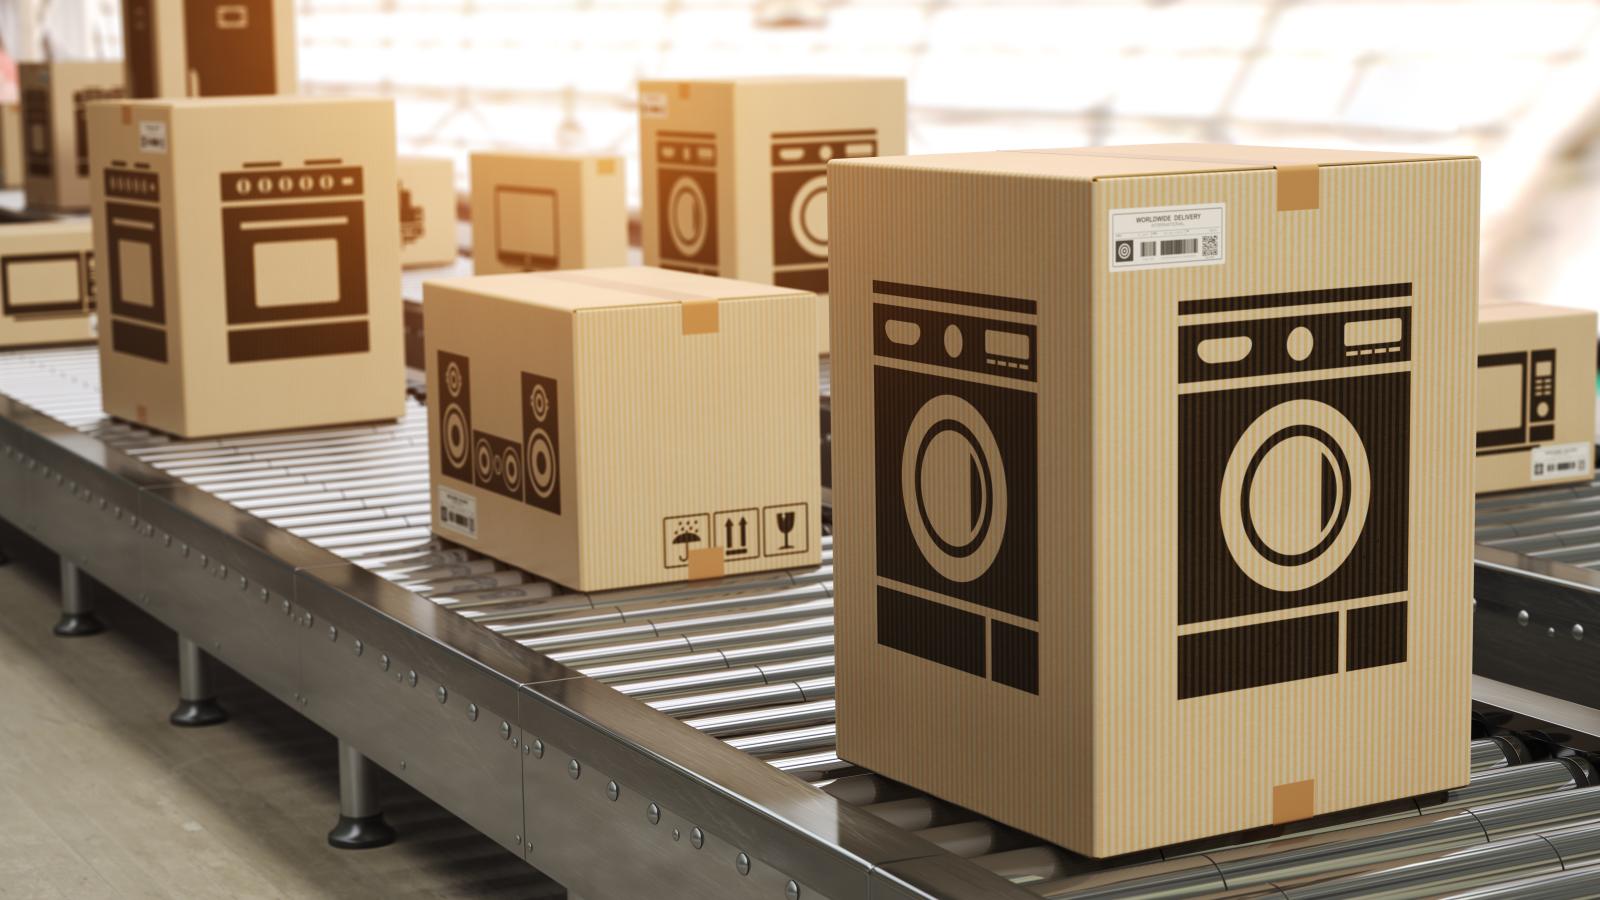 How Low Demand for Cardboard Boxes Could Signal a Recession